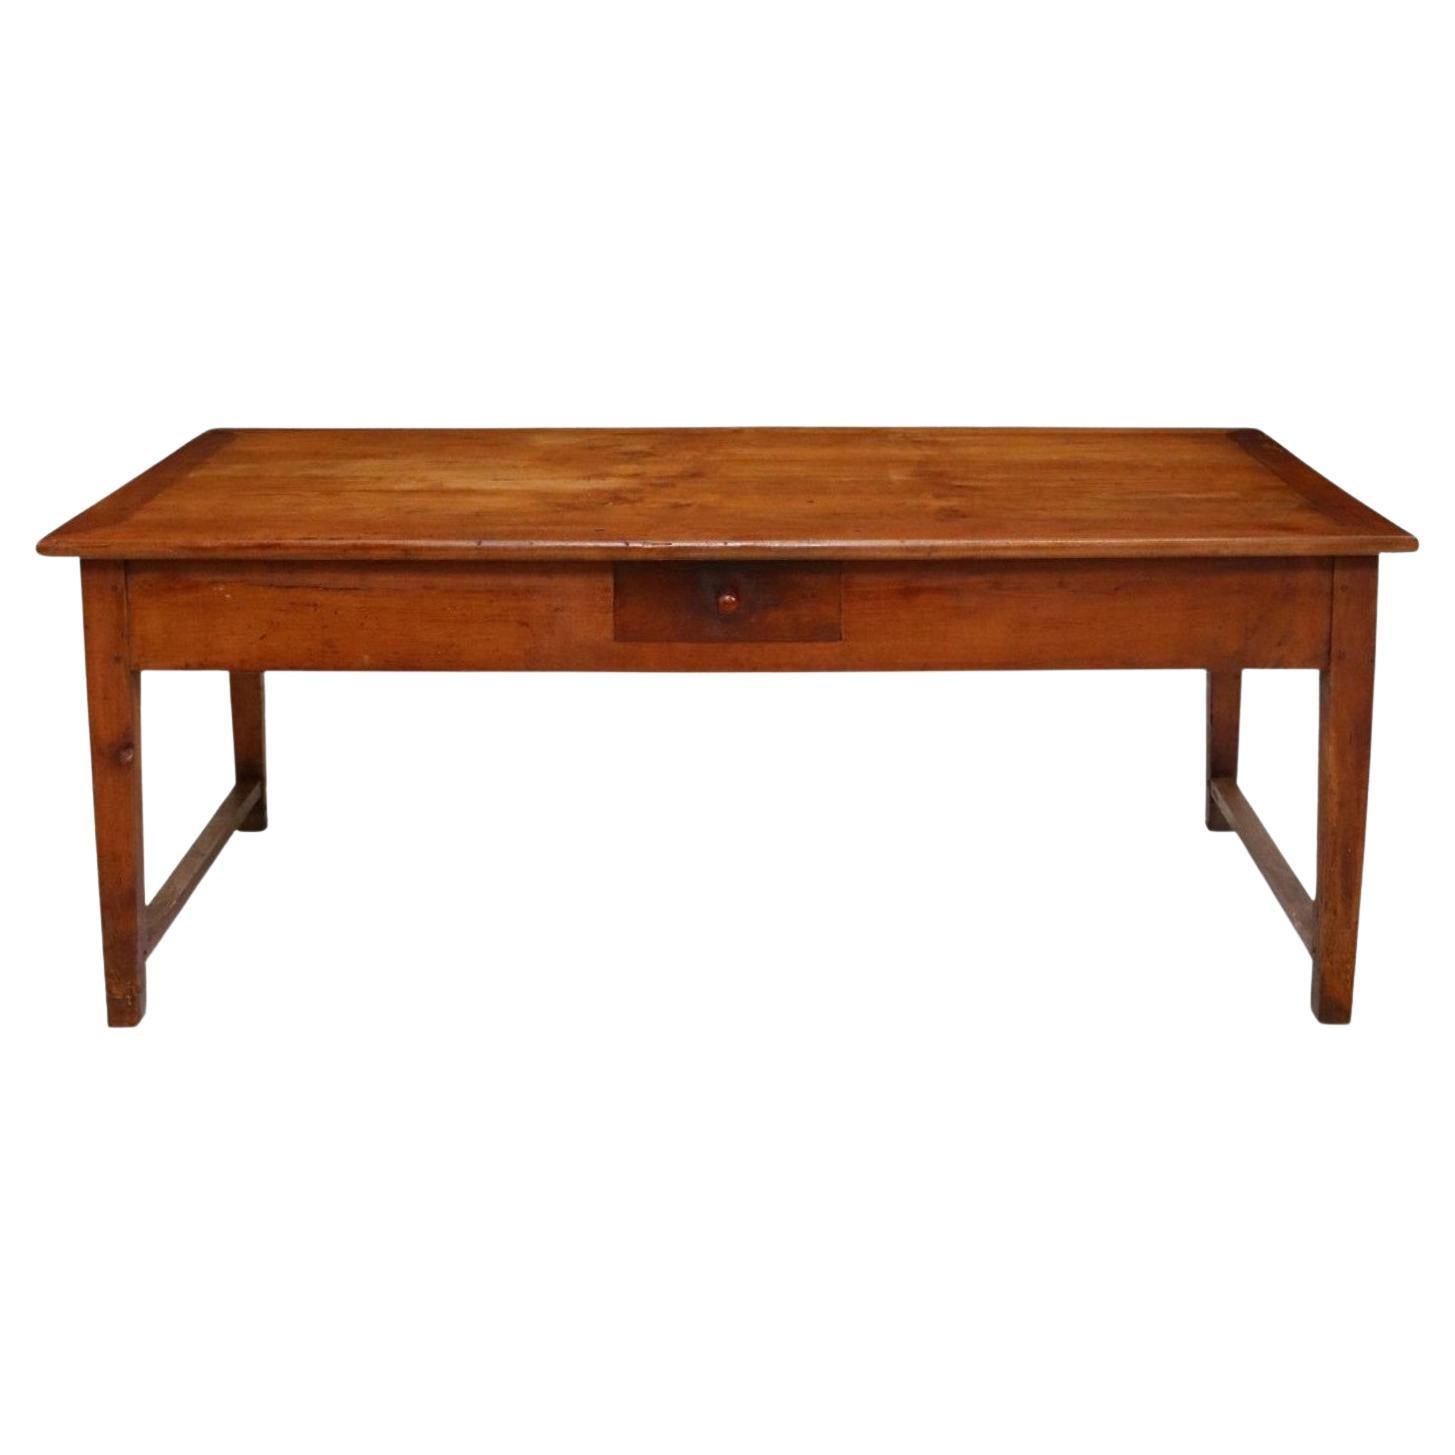 19th Century French Provincial Fruitwood Farmhouse Table